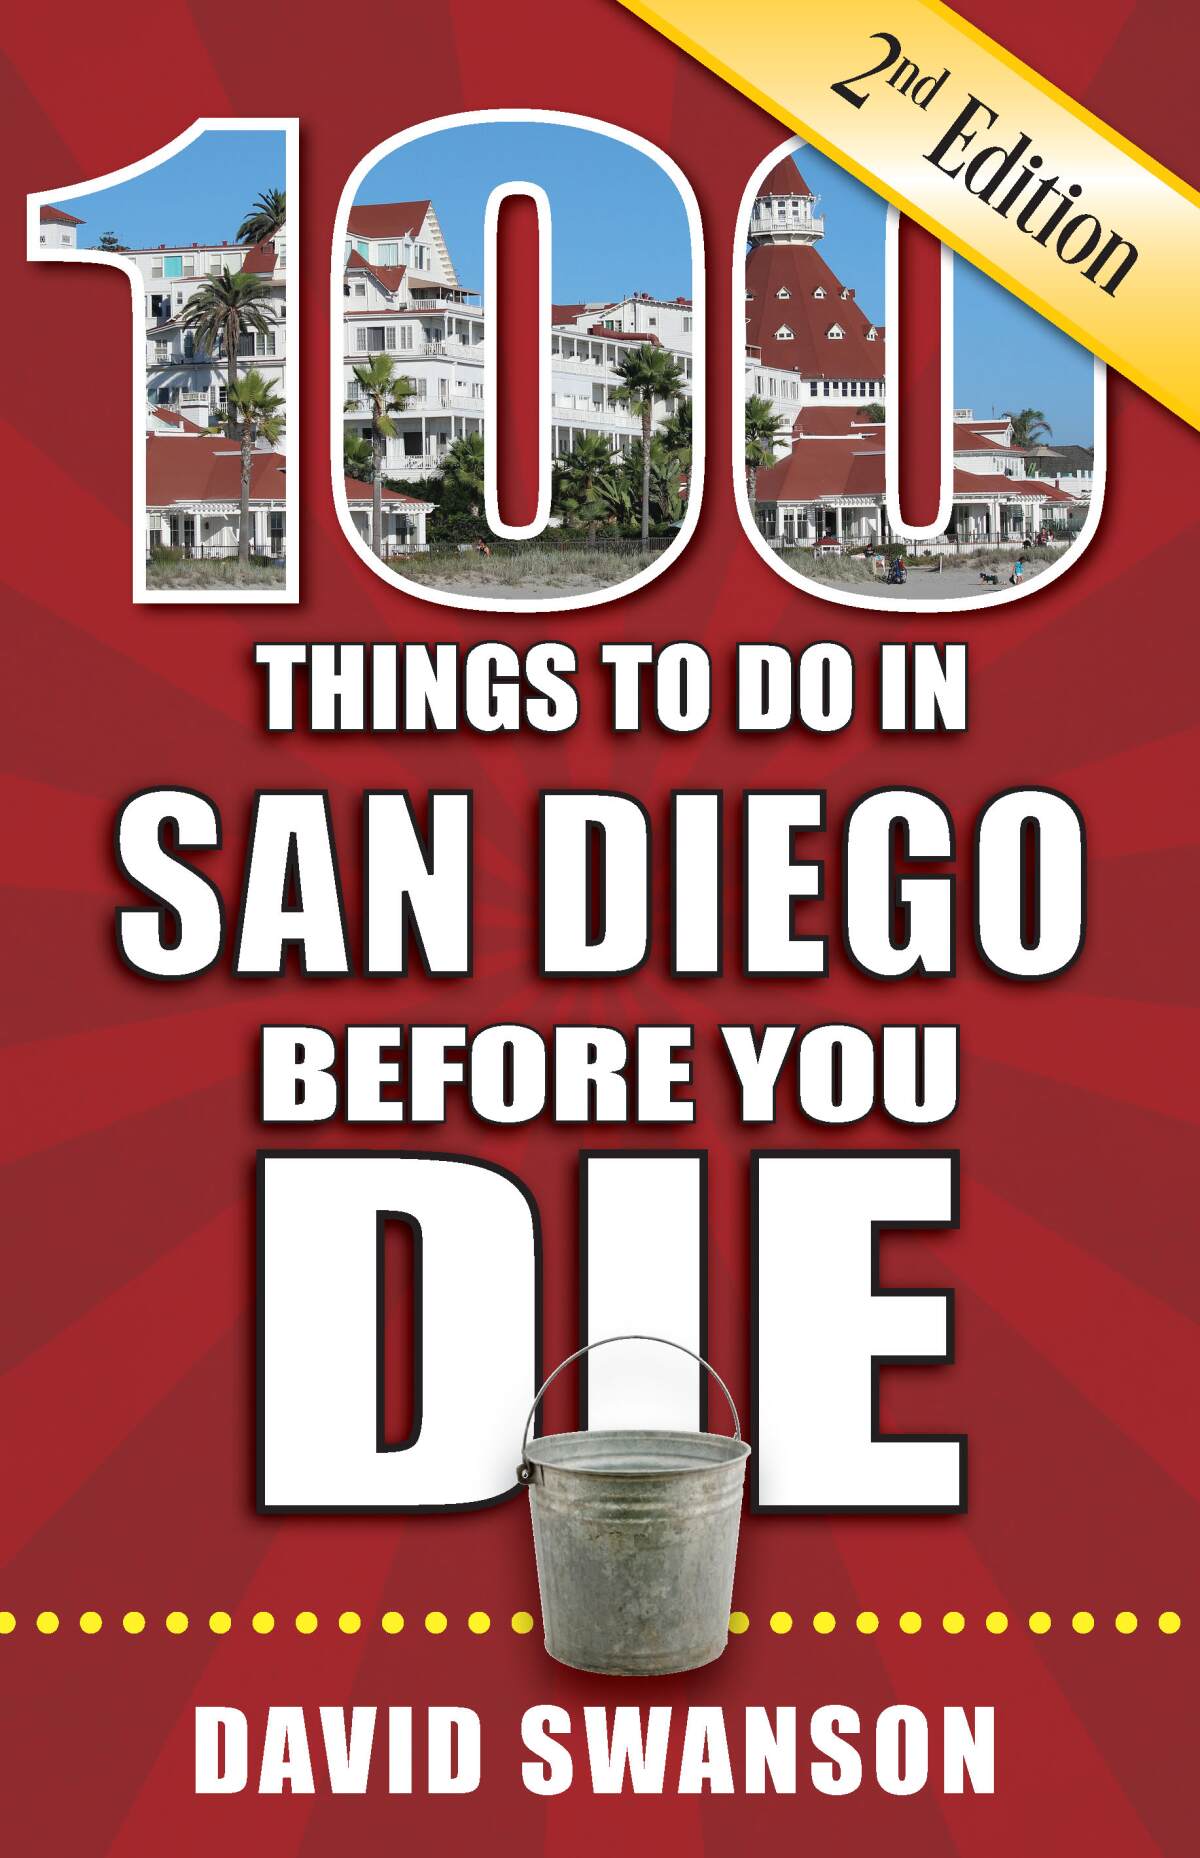 La Jolla locations fill the pages of David Swanson's "100 Things to Do in San Diego Before You Die."